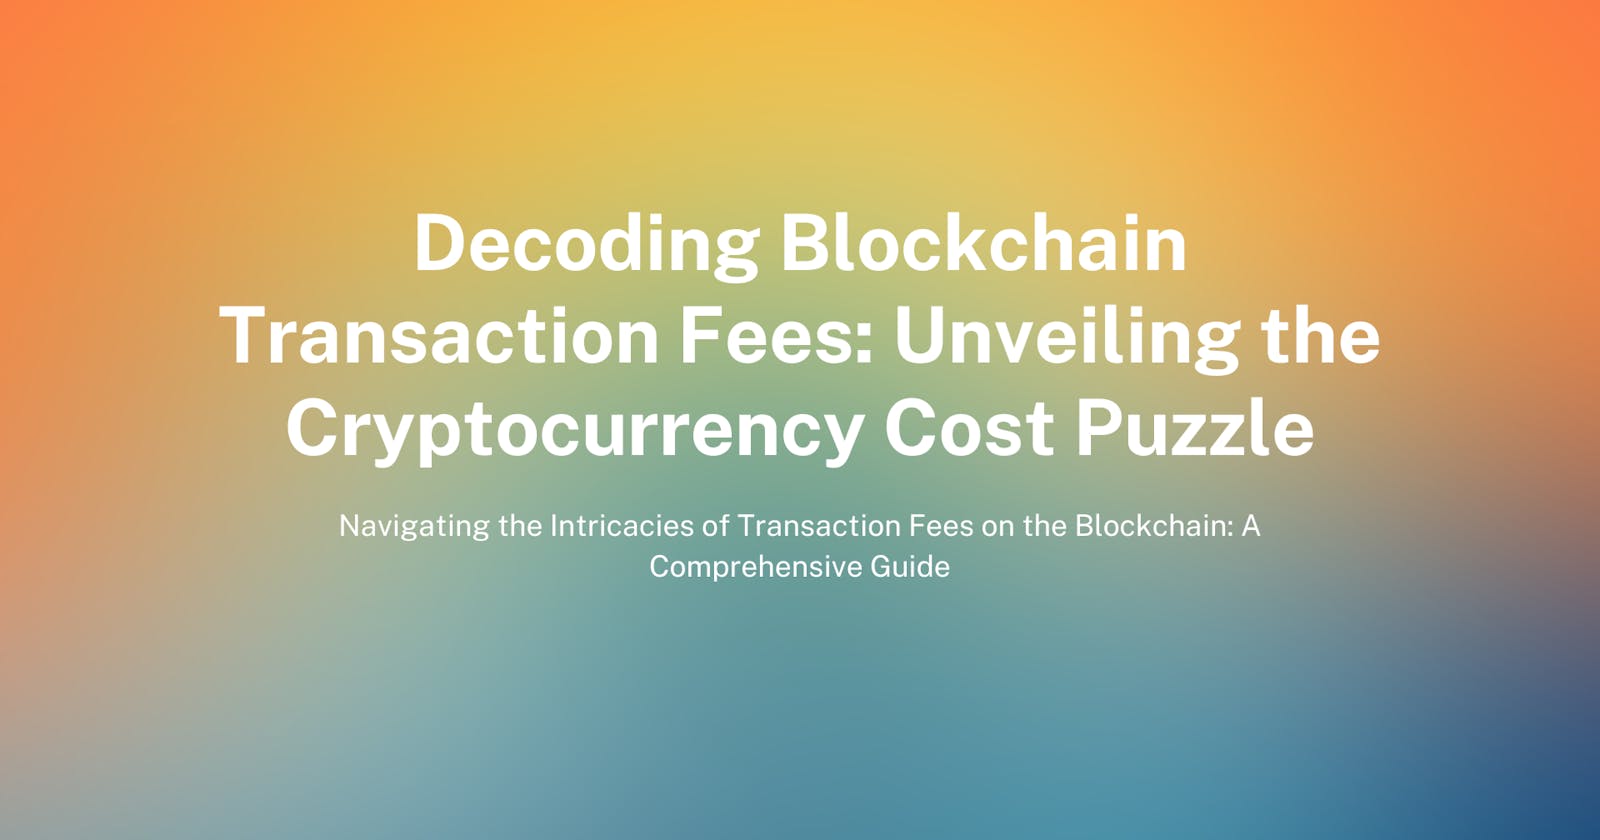 Decoding Blockchain Transaction Fees: Unveiling the Cryptocurrency Cost Puzzle